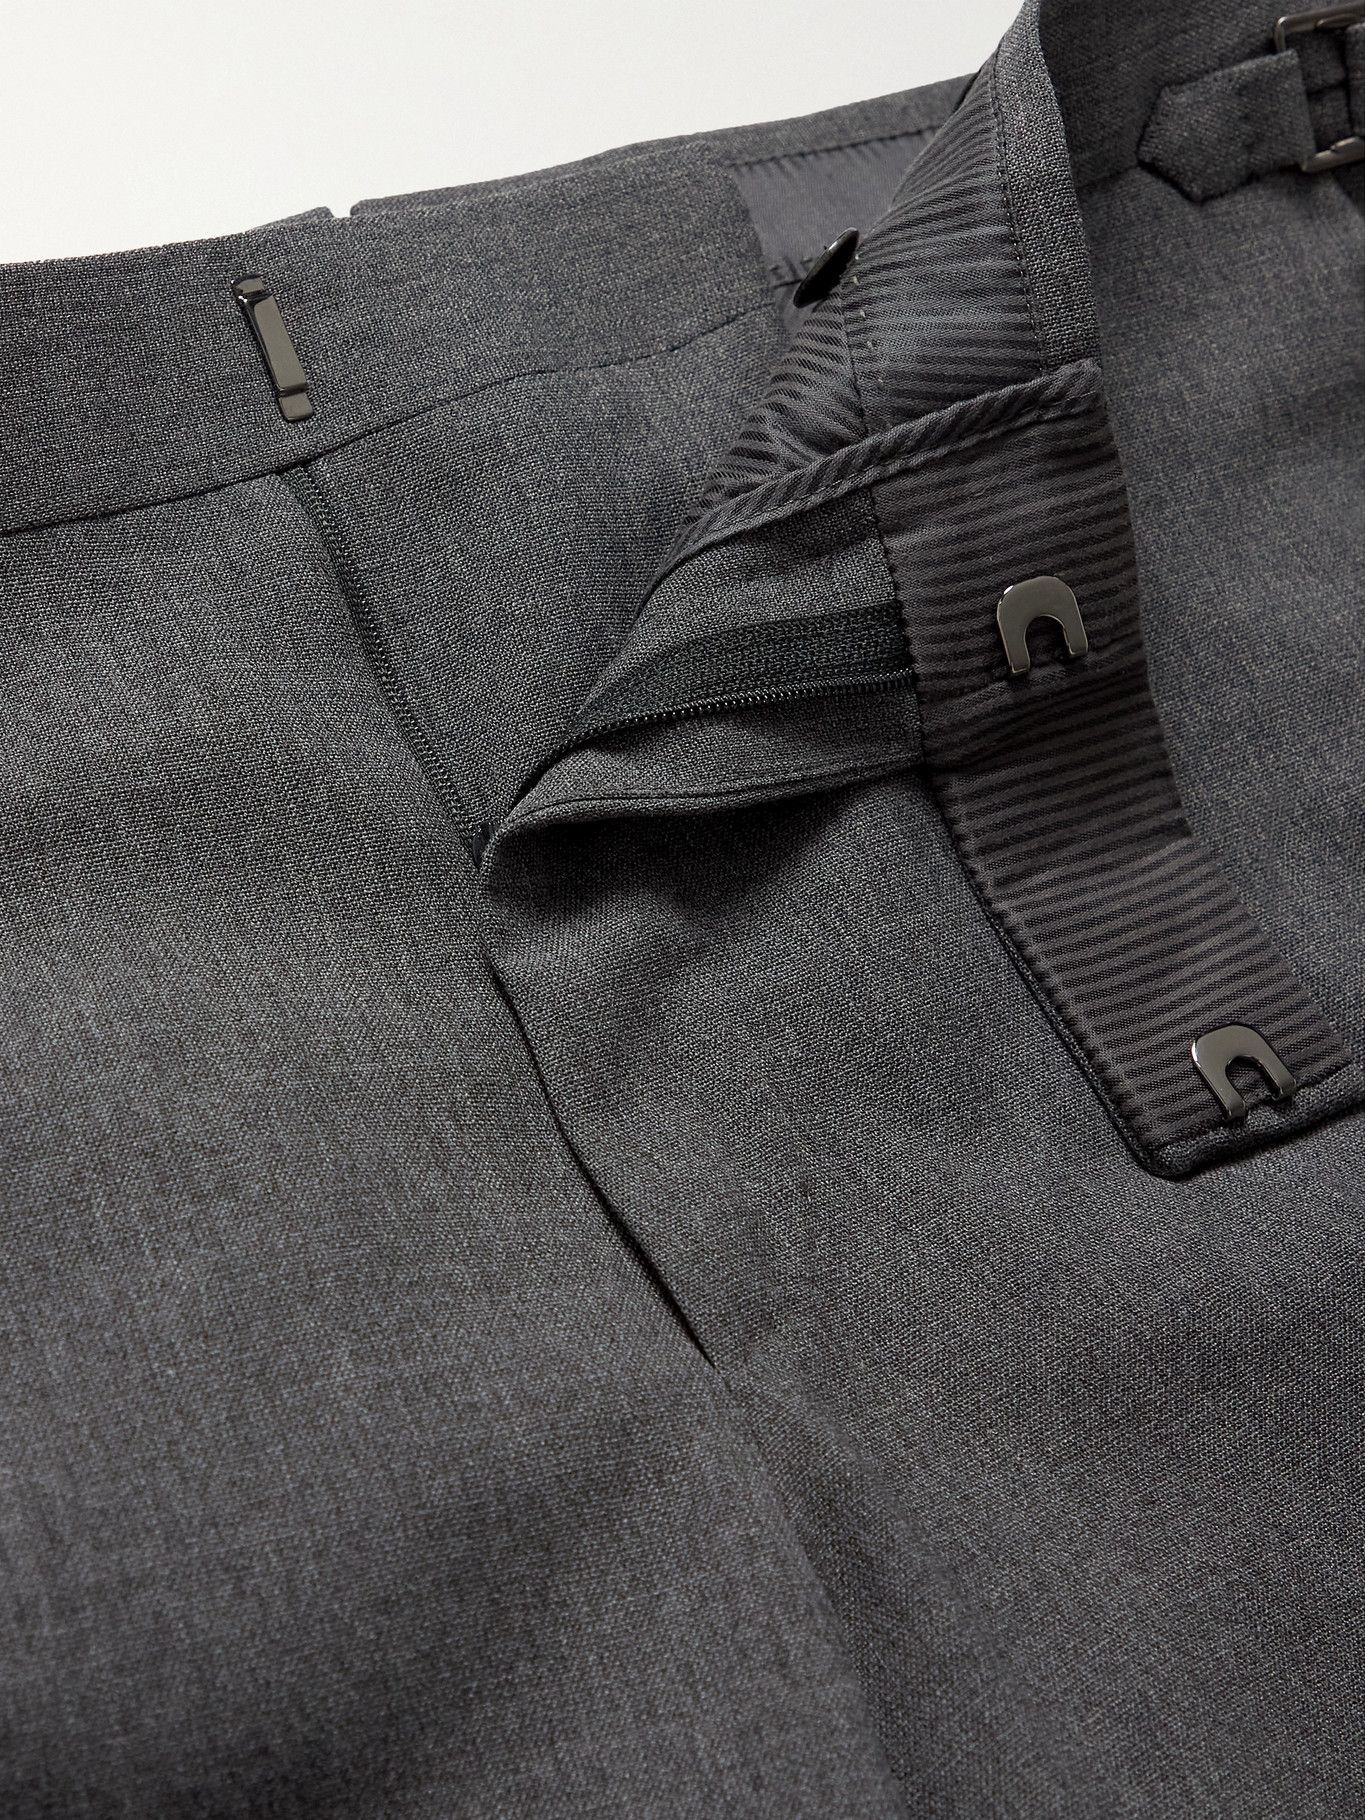 TOM FORD - O'Connor Slim-Fit Wool Suit Trousers - Gray TOM FORD